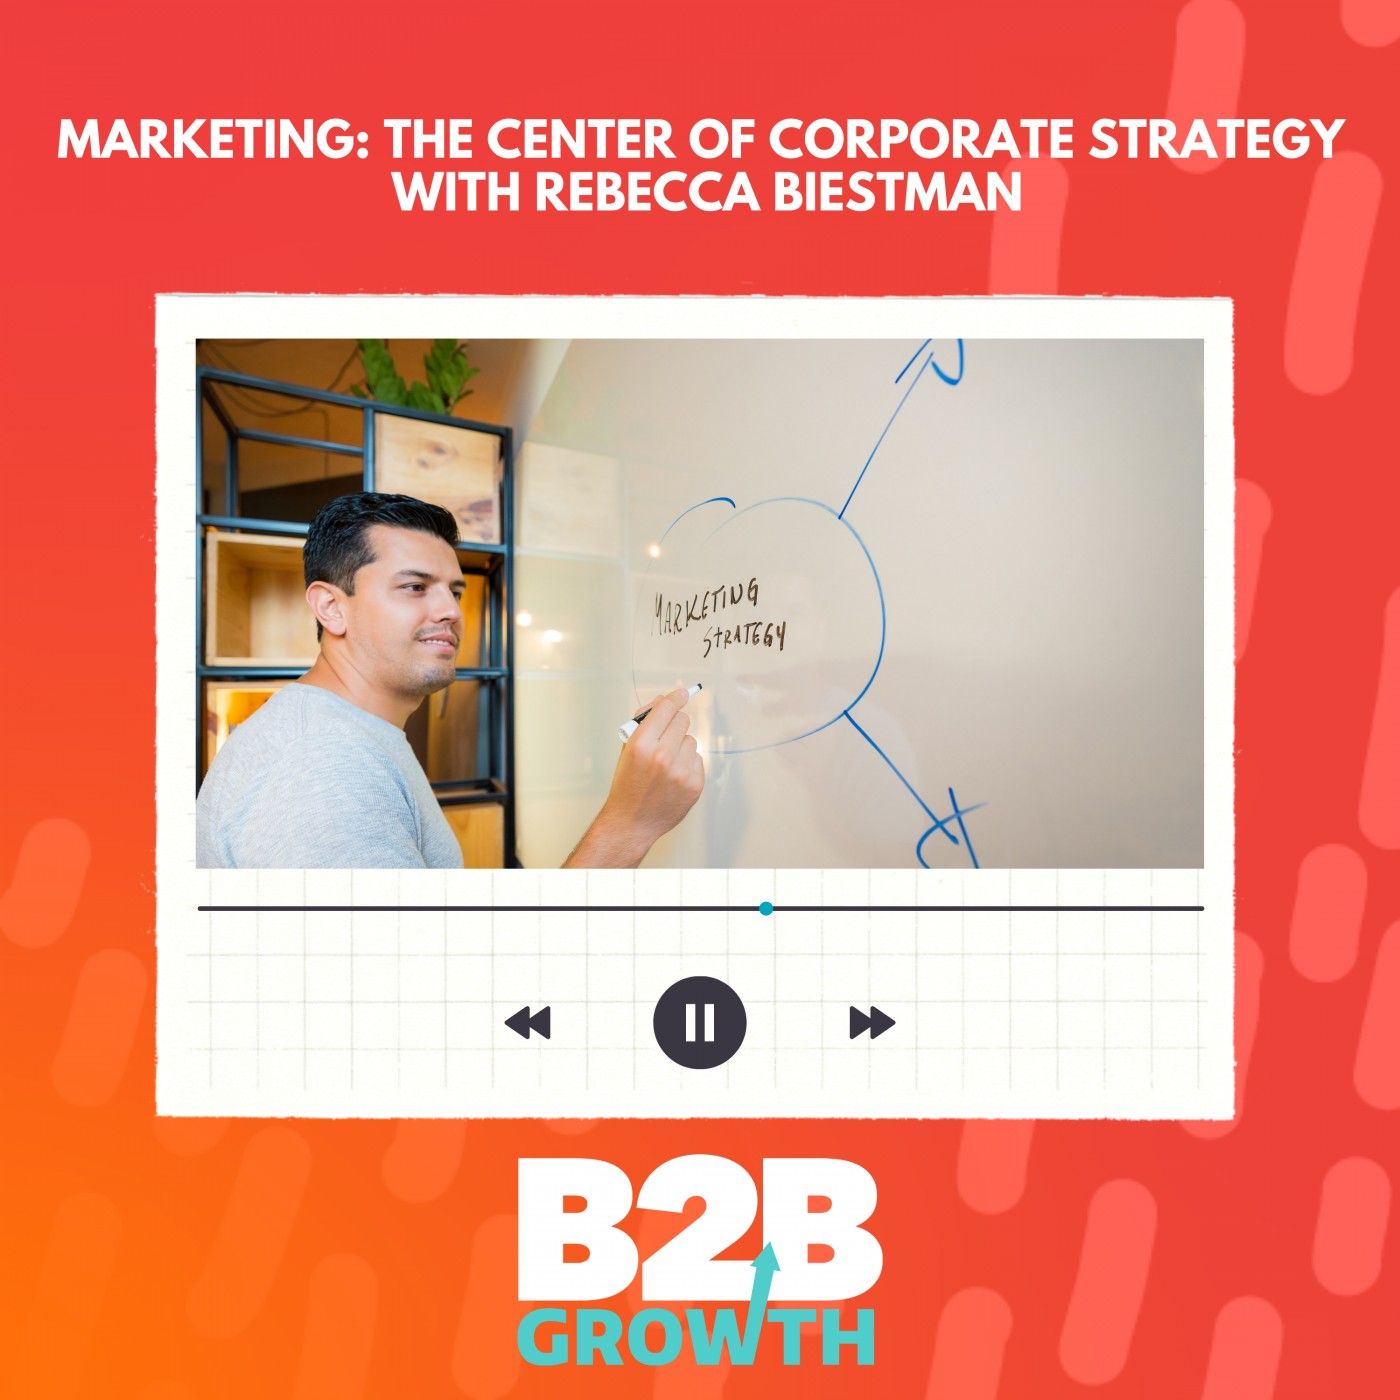 Marketing: The Center of Corporate Strategy, with Rebecca Biestman